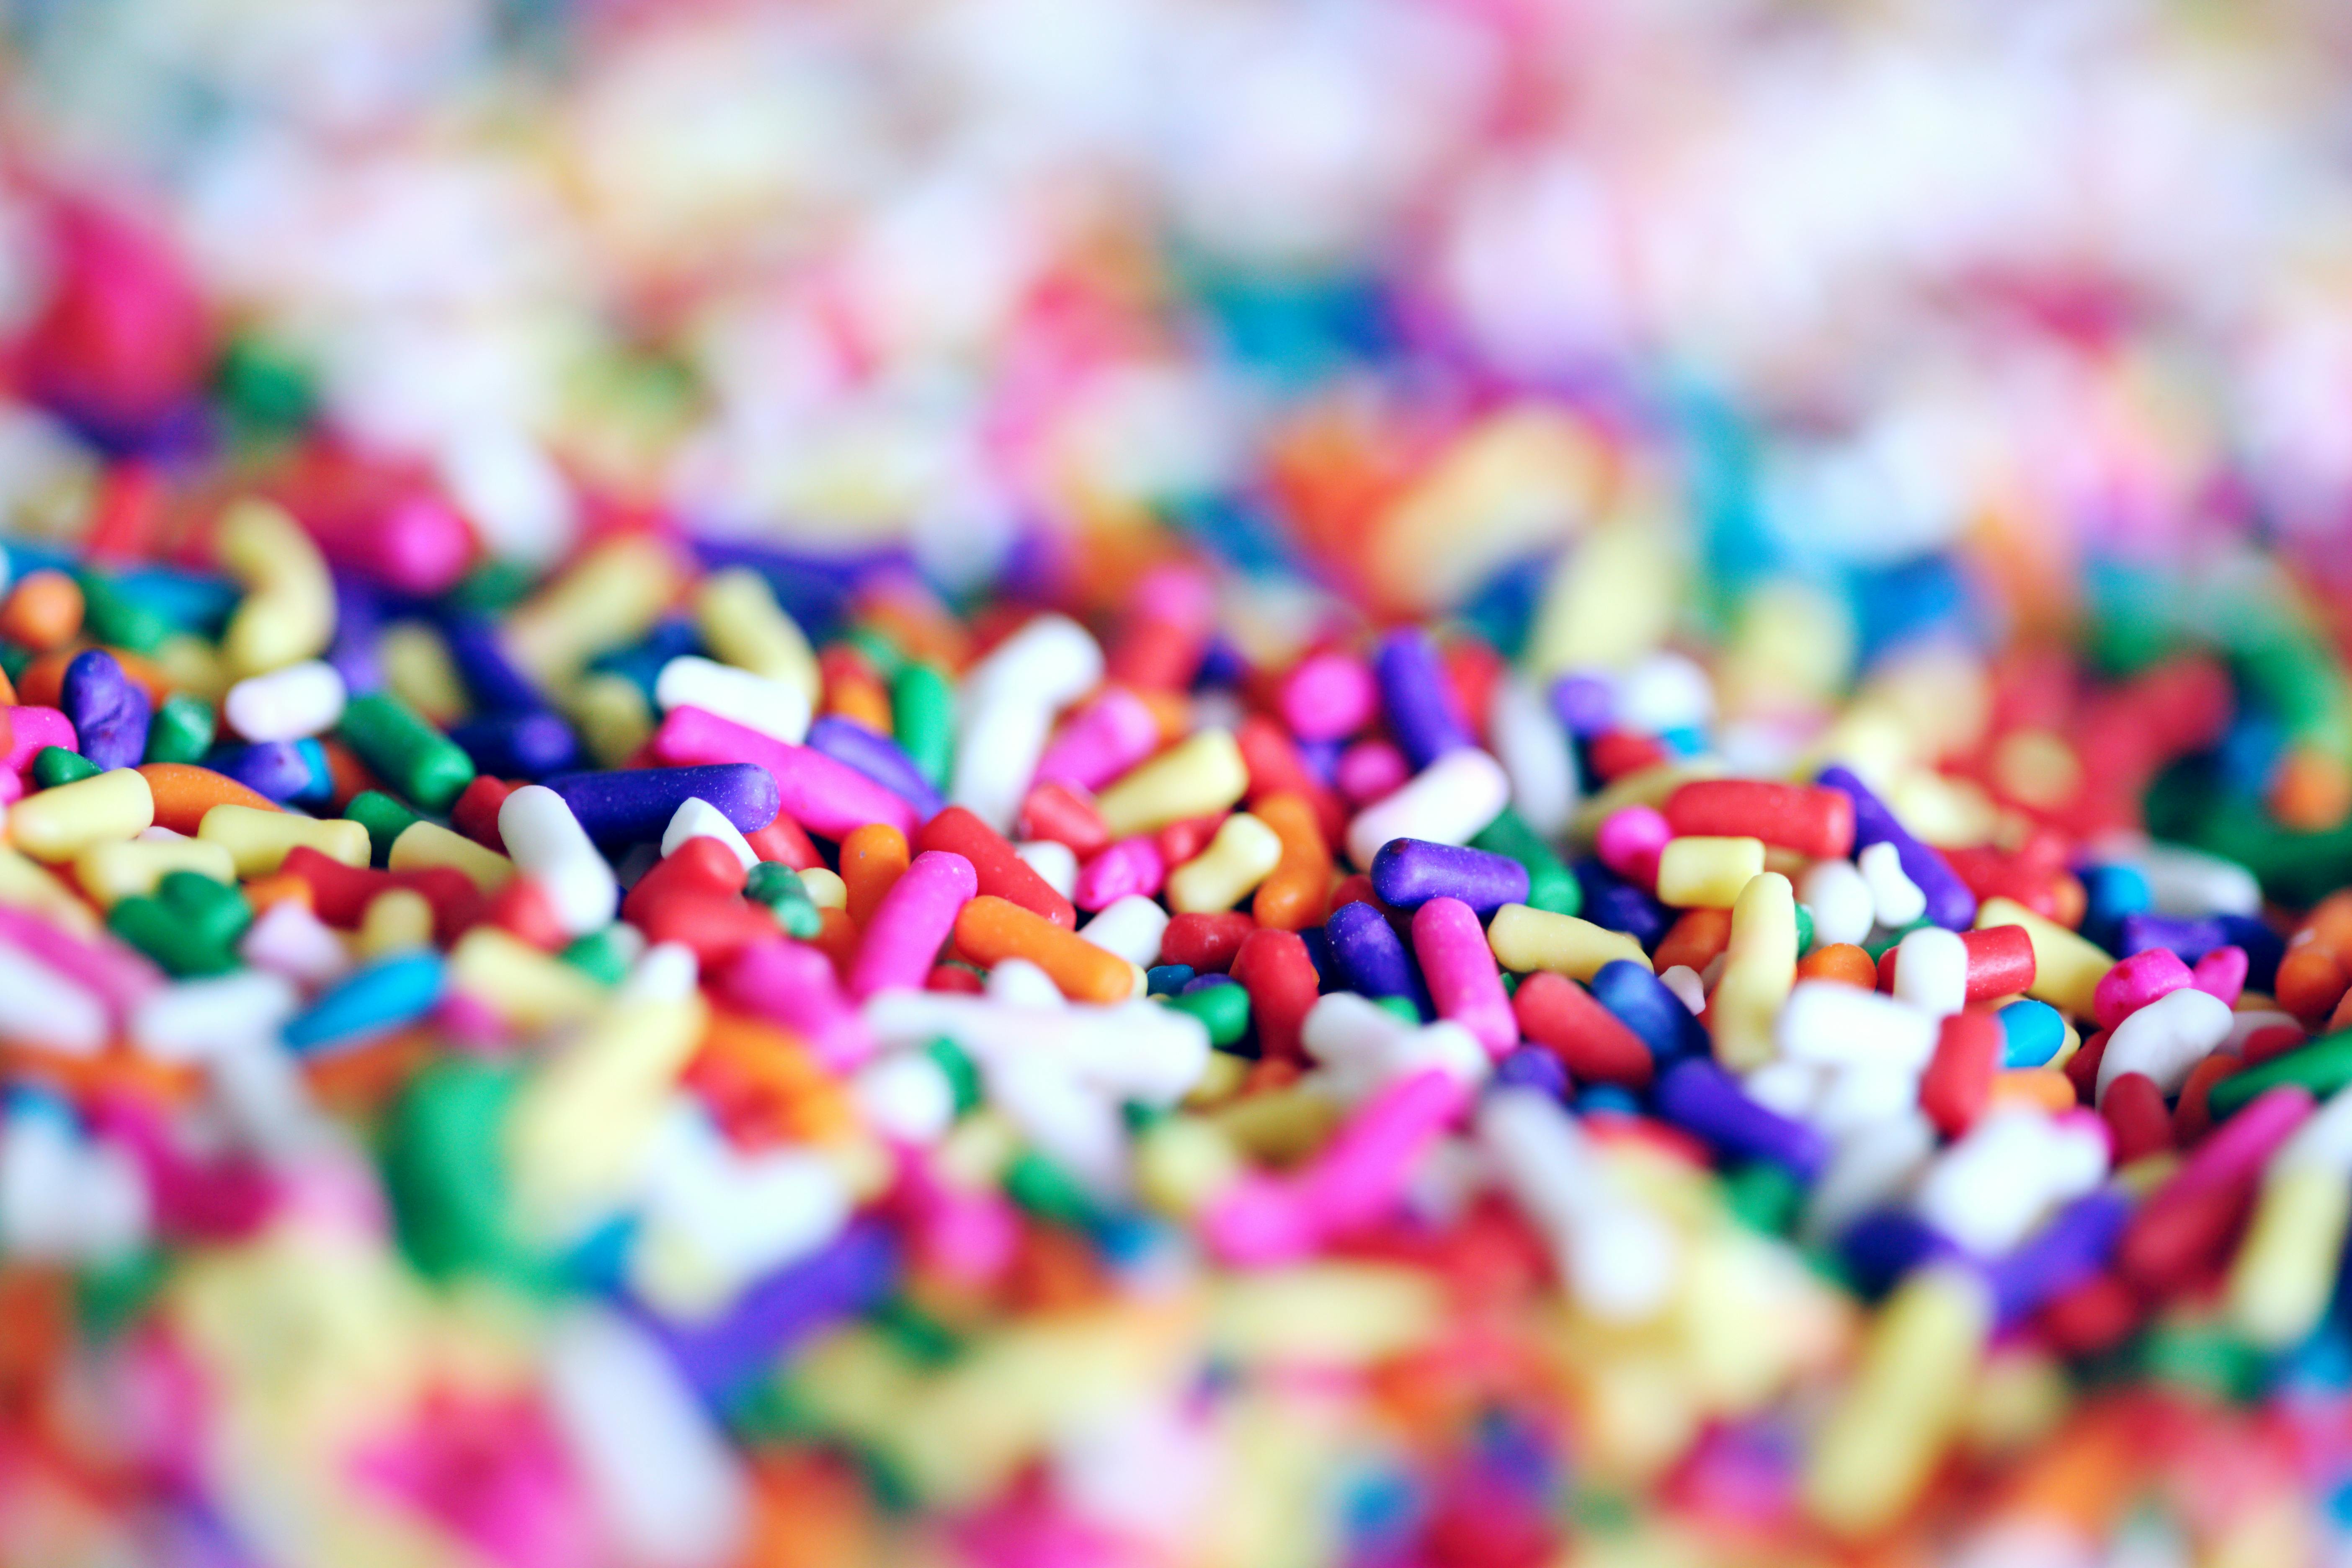 Sprinkles Photos Download The BEST Free Sprinkles Stock Photos  HD Images